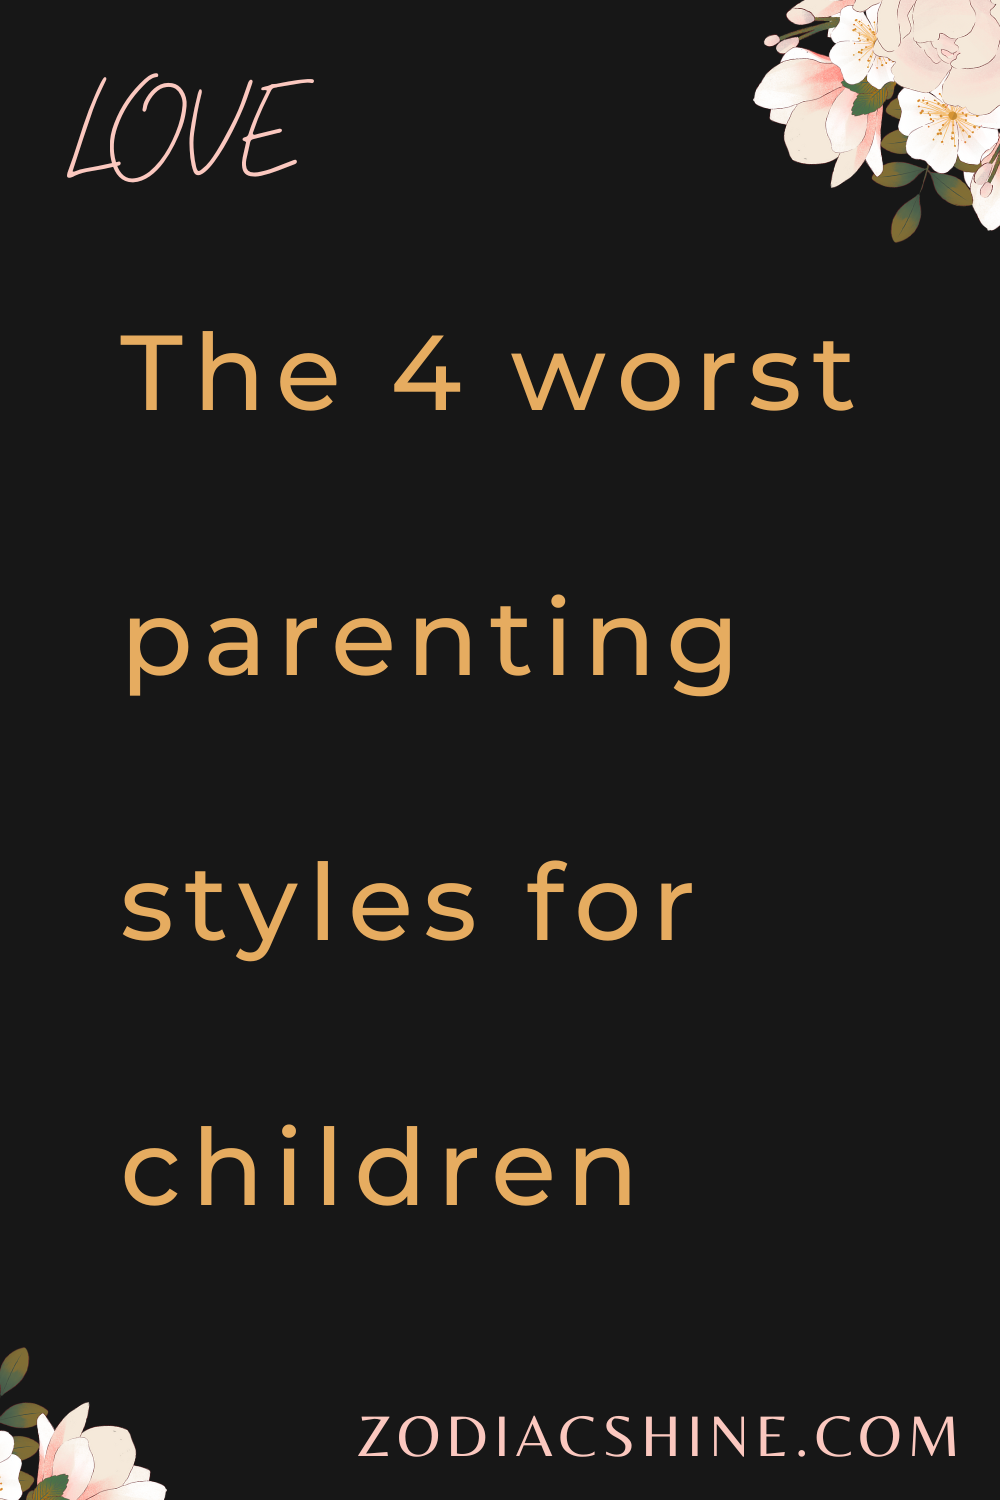 The 4 worst parenting styles for children